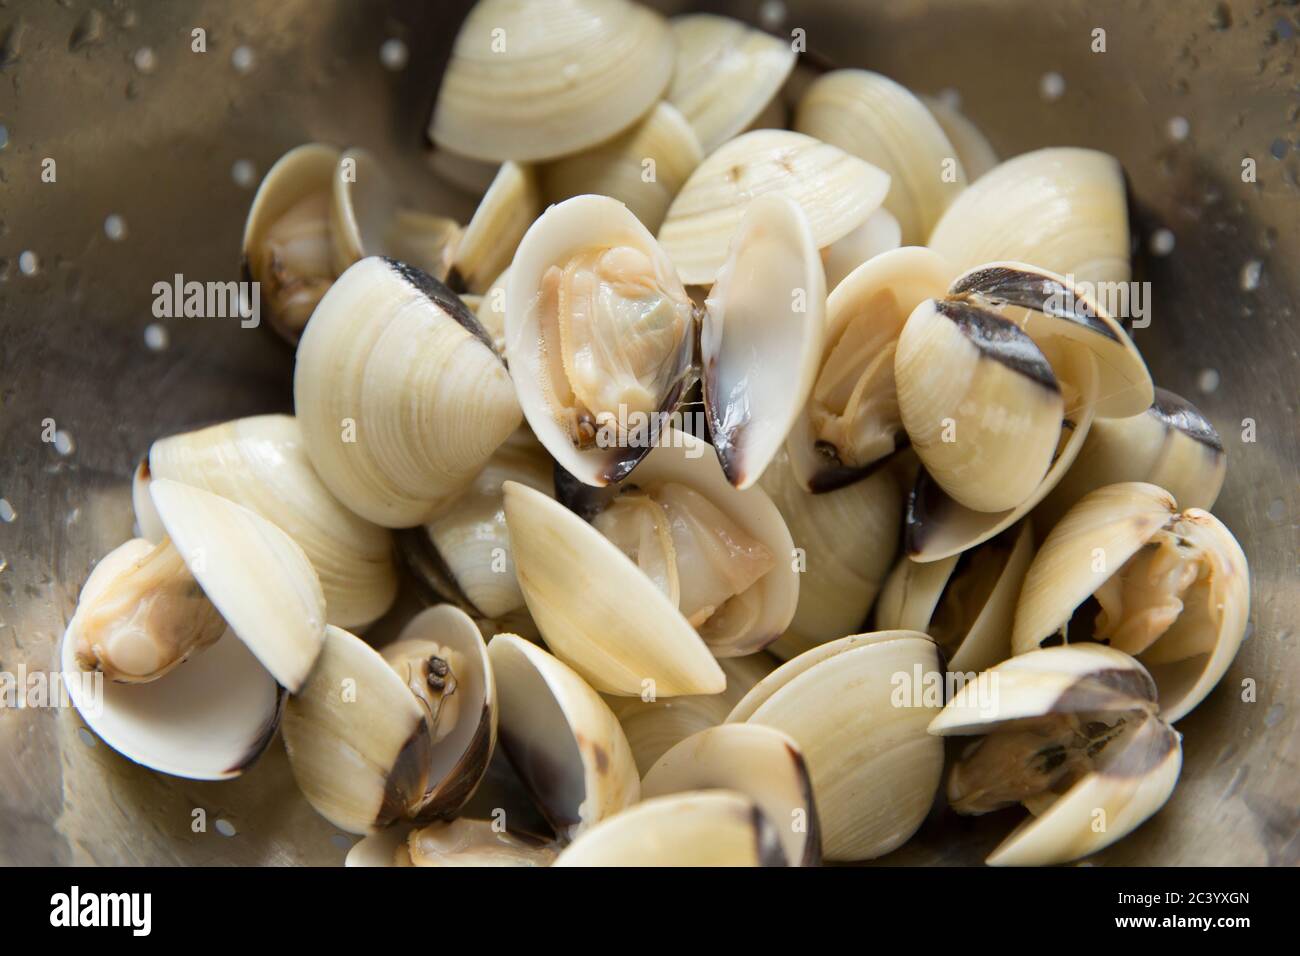 Pre-cooked, vacuum packed, defrosted white clams, Meretrix lyrata, imported from Vietnam and bought from a Waitrose store. Dorset England UK GB Stock Photo